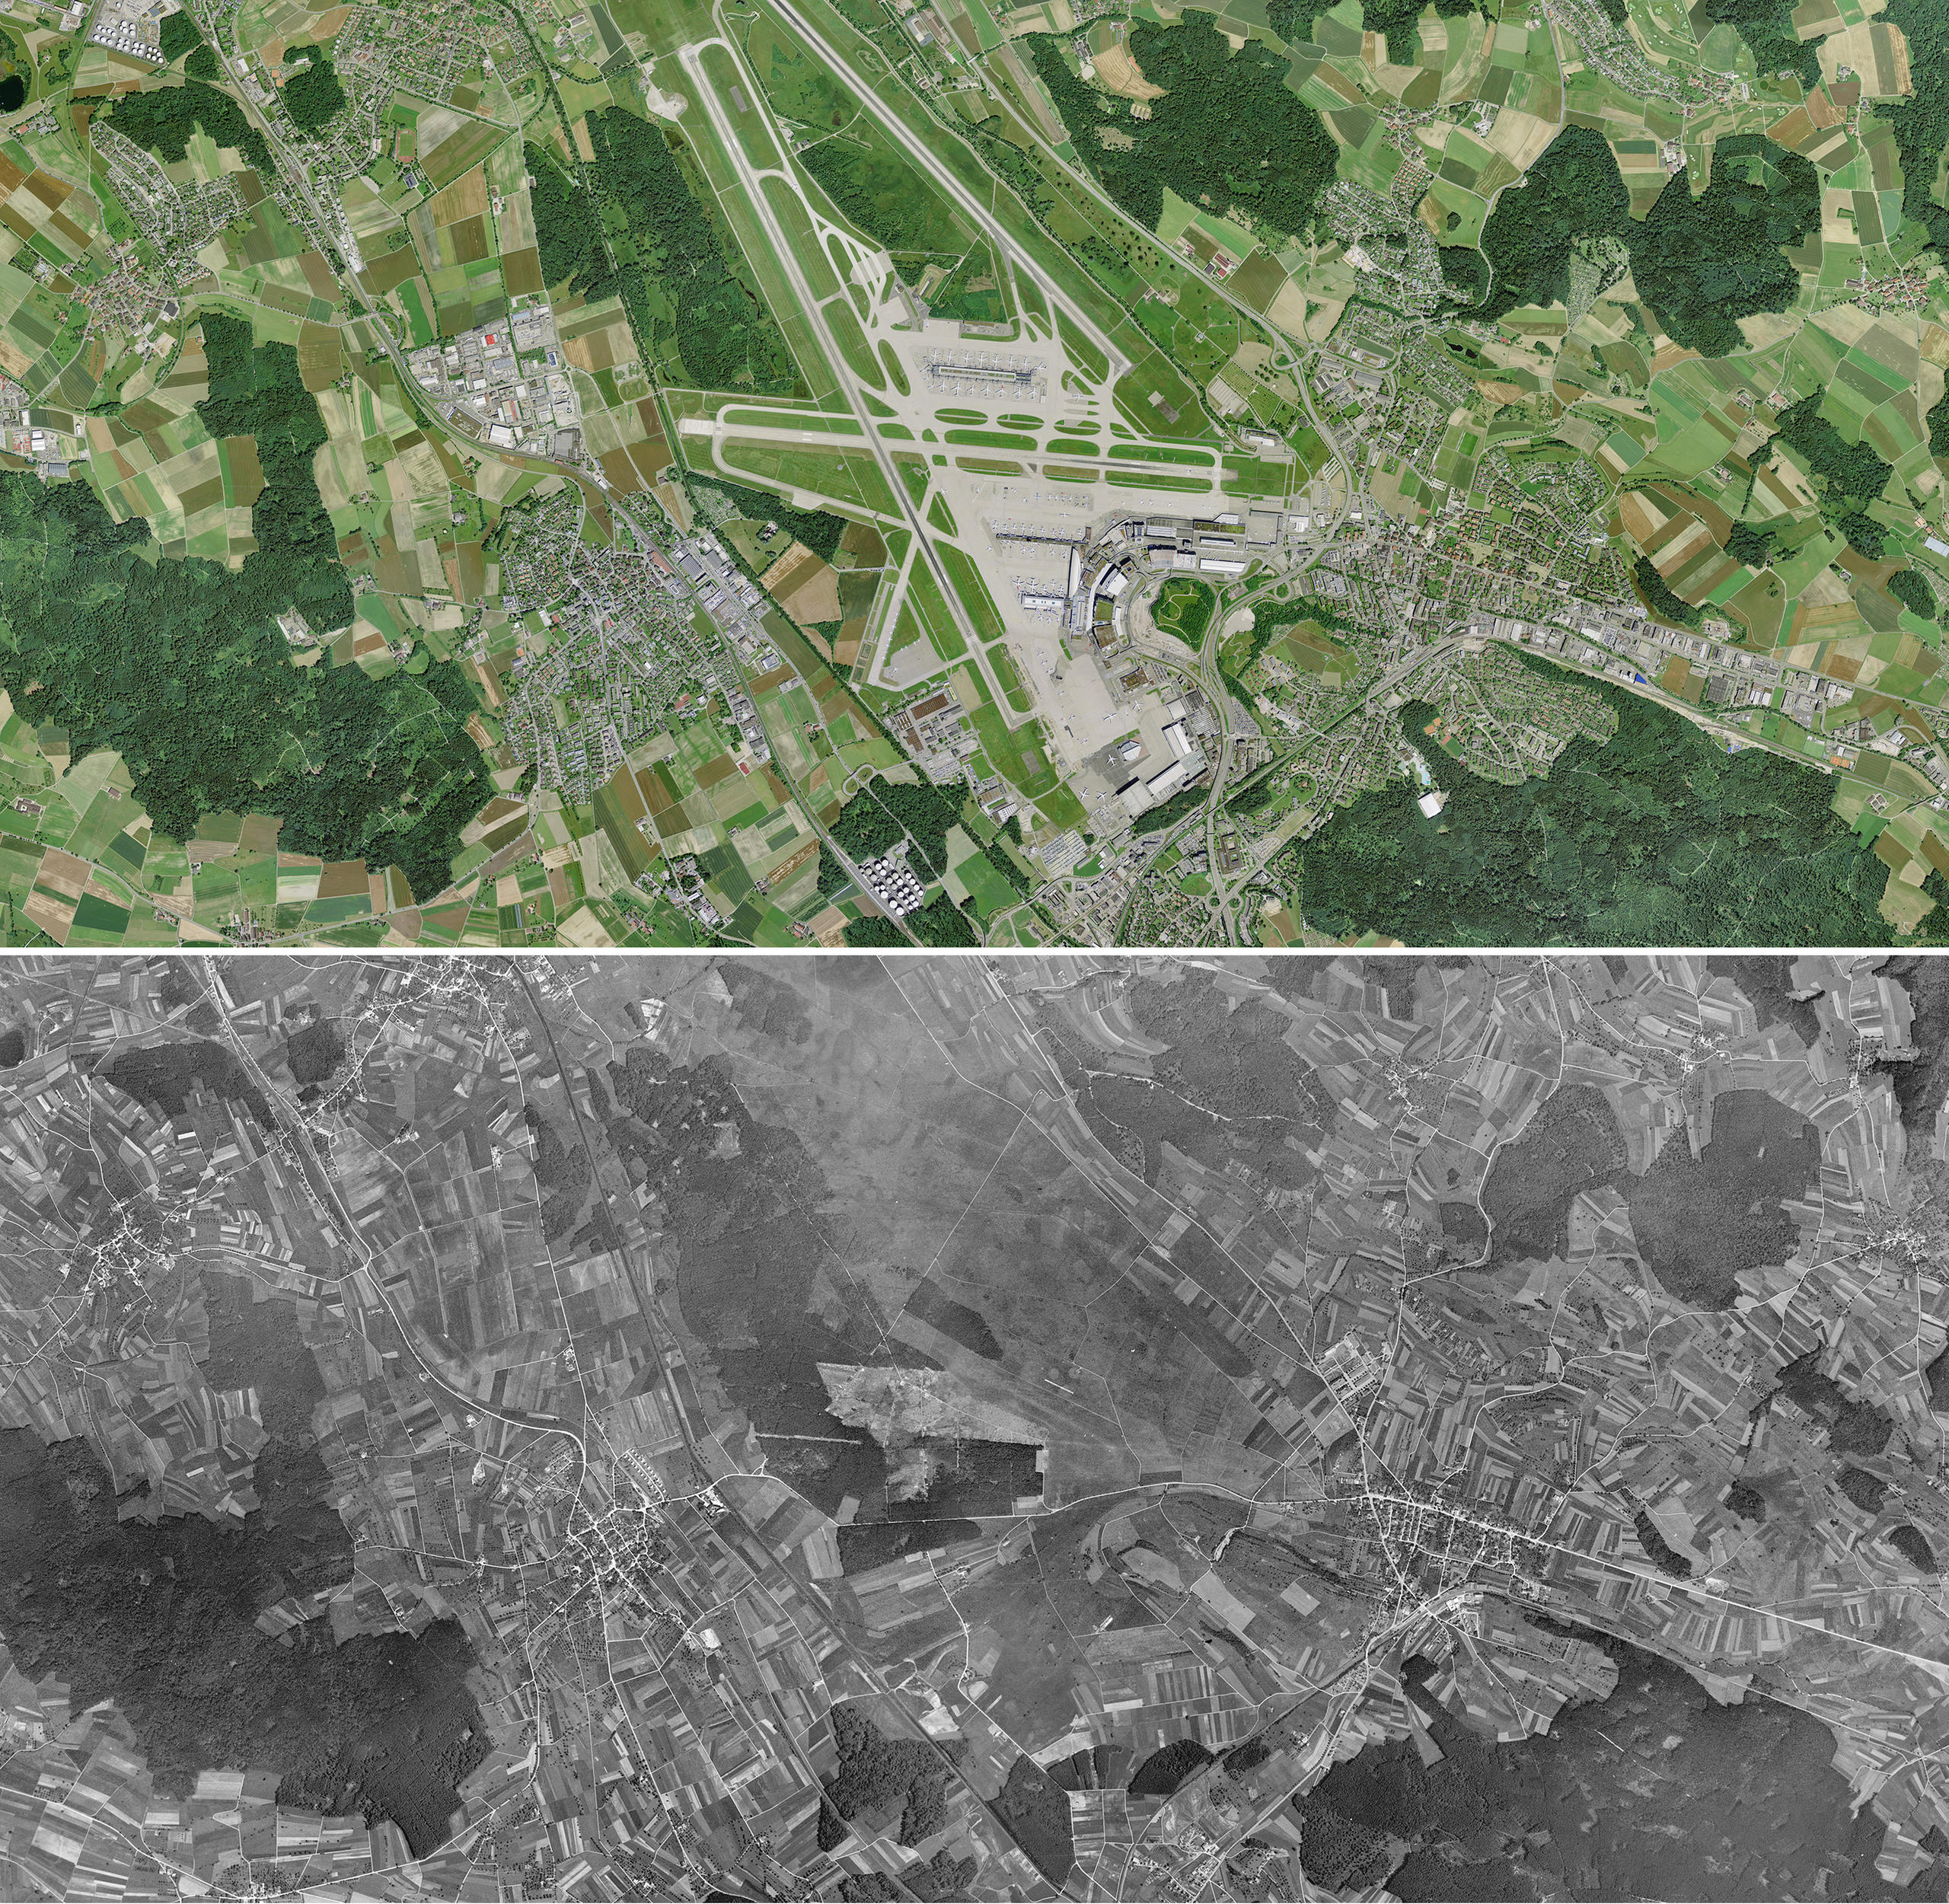 Aerial view of Kloten above in 2016 and below in 1946